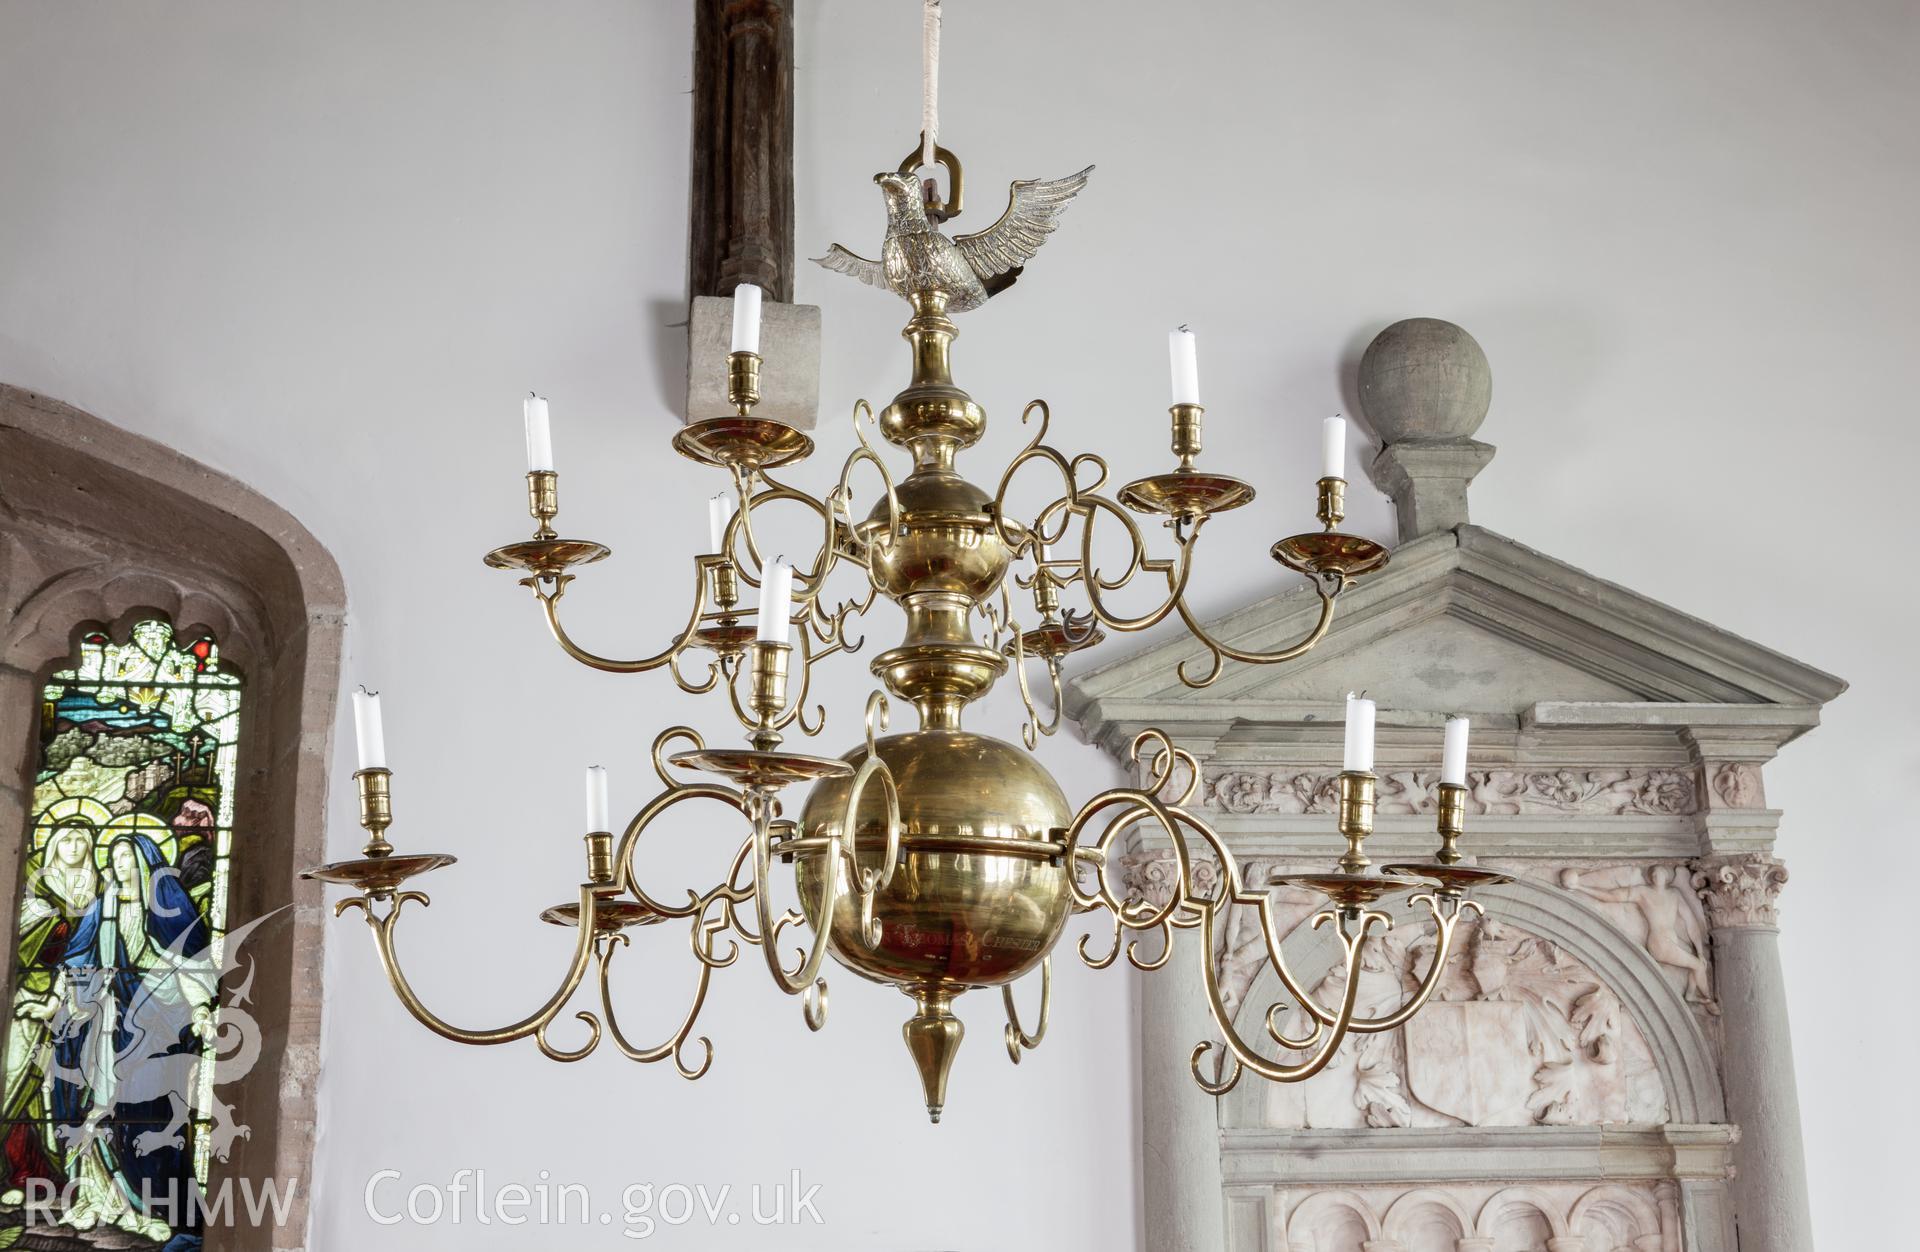 Chandelier by John Thomas of Chester, 1753.